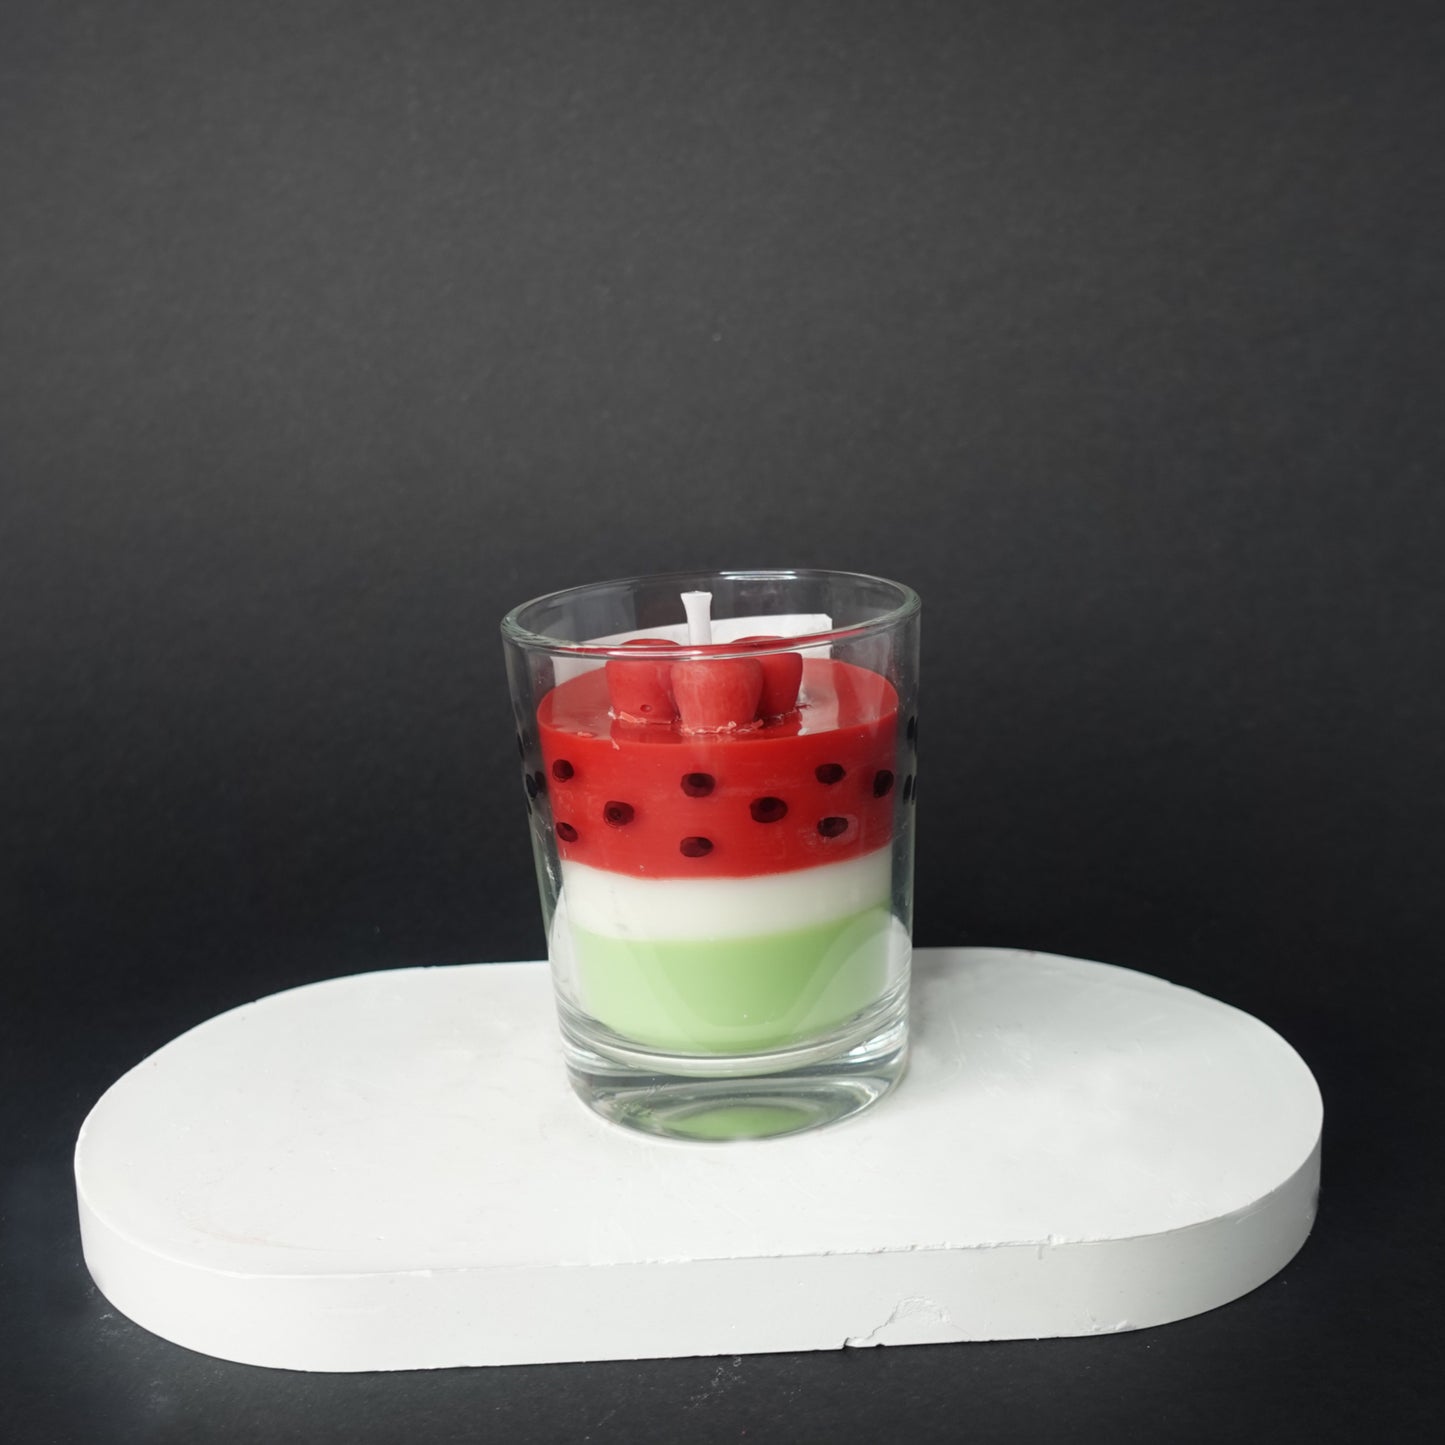 Watermelon candle